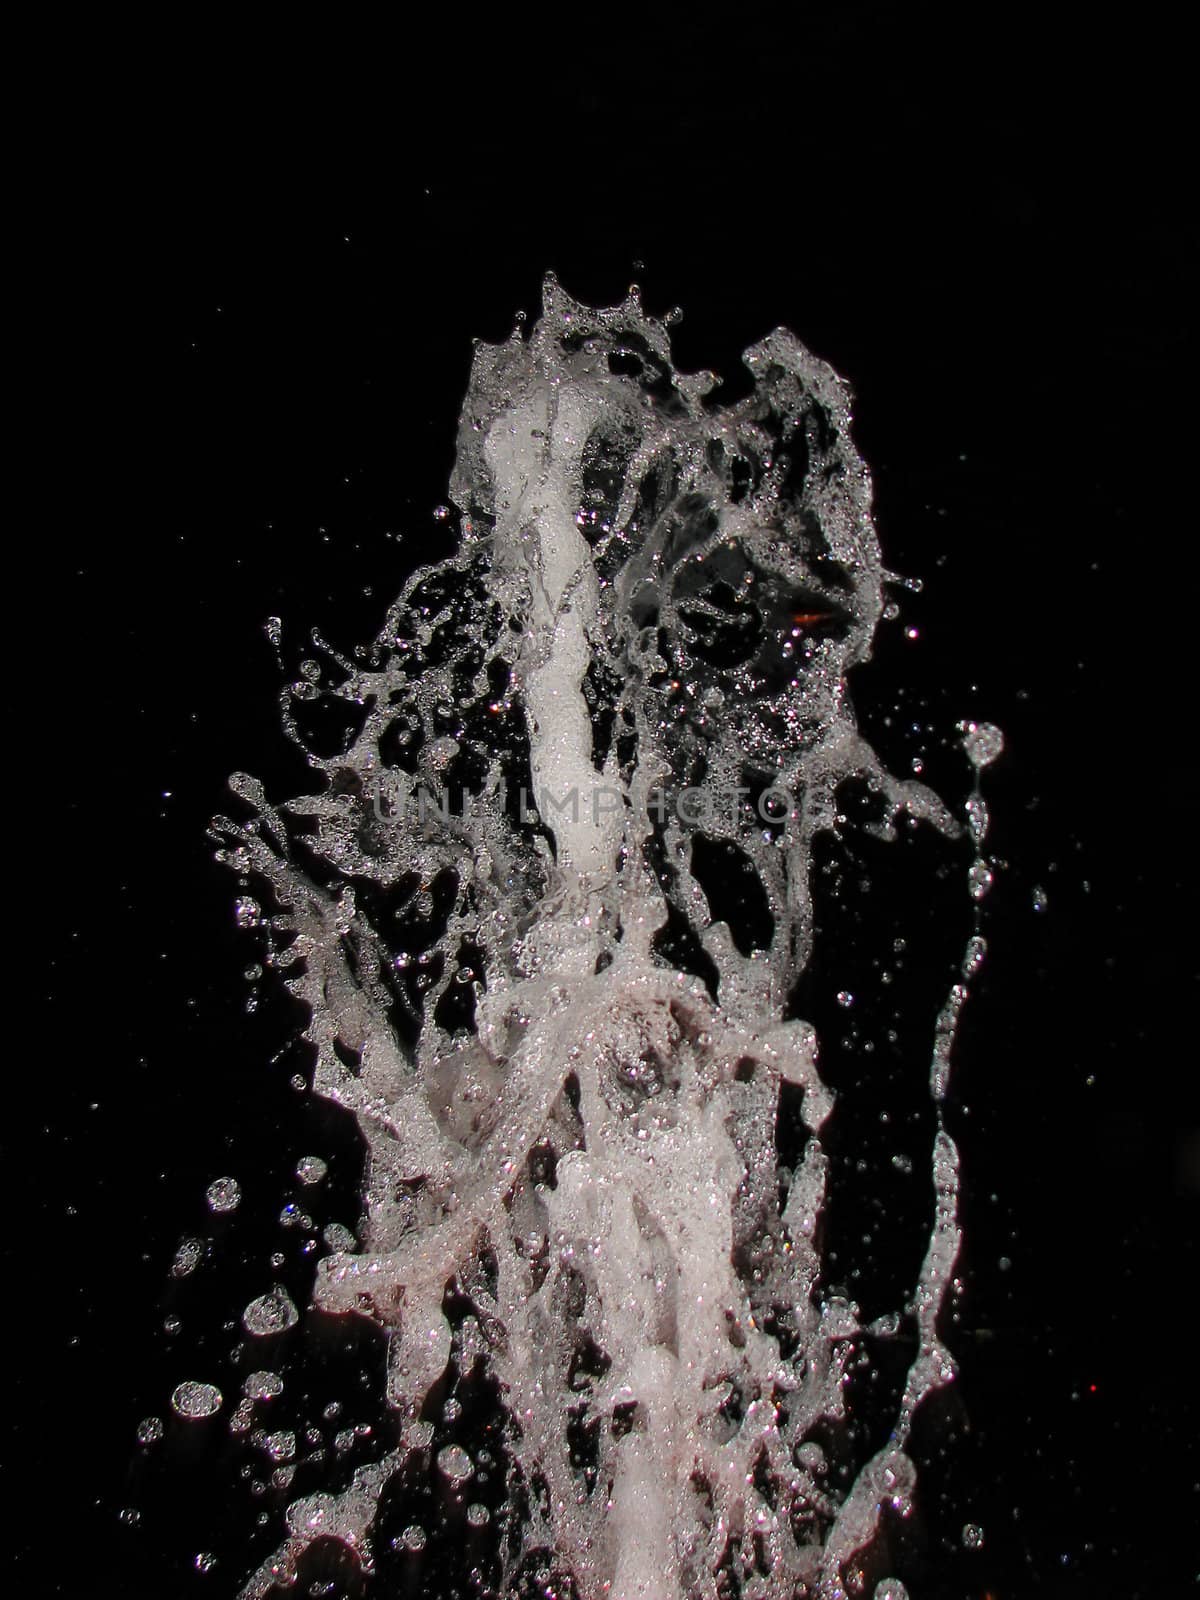 water splashings and bubbles on the black background